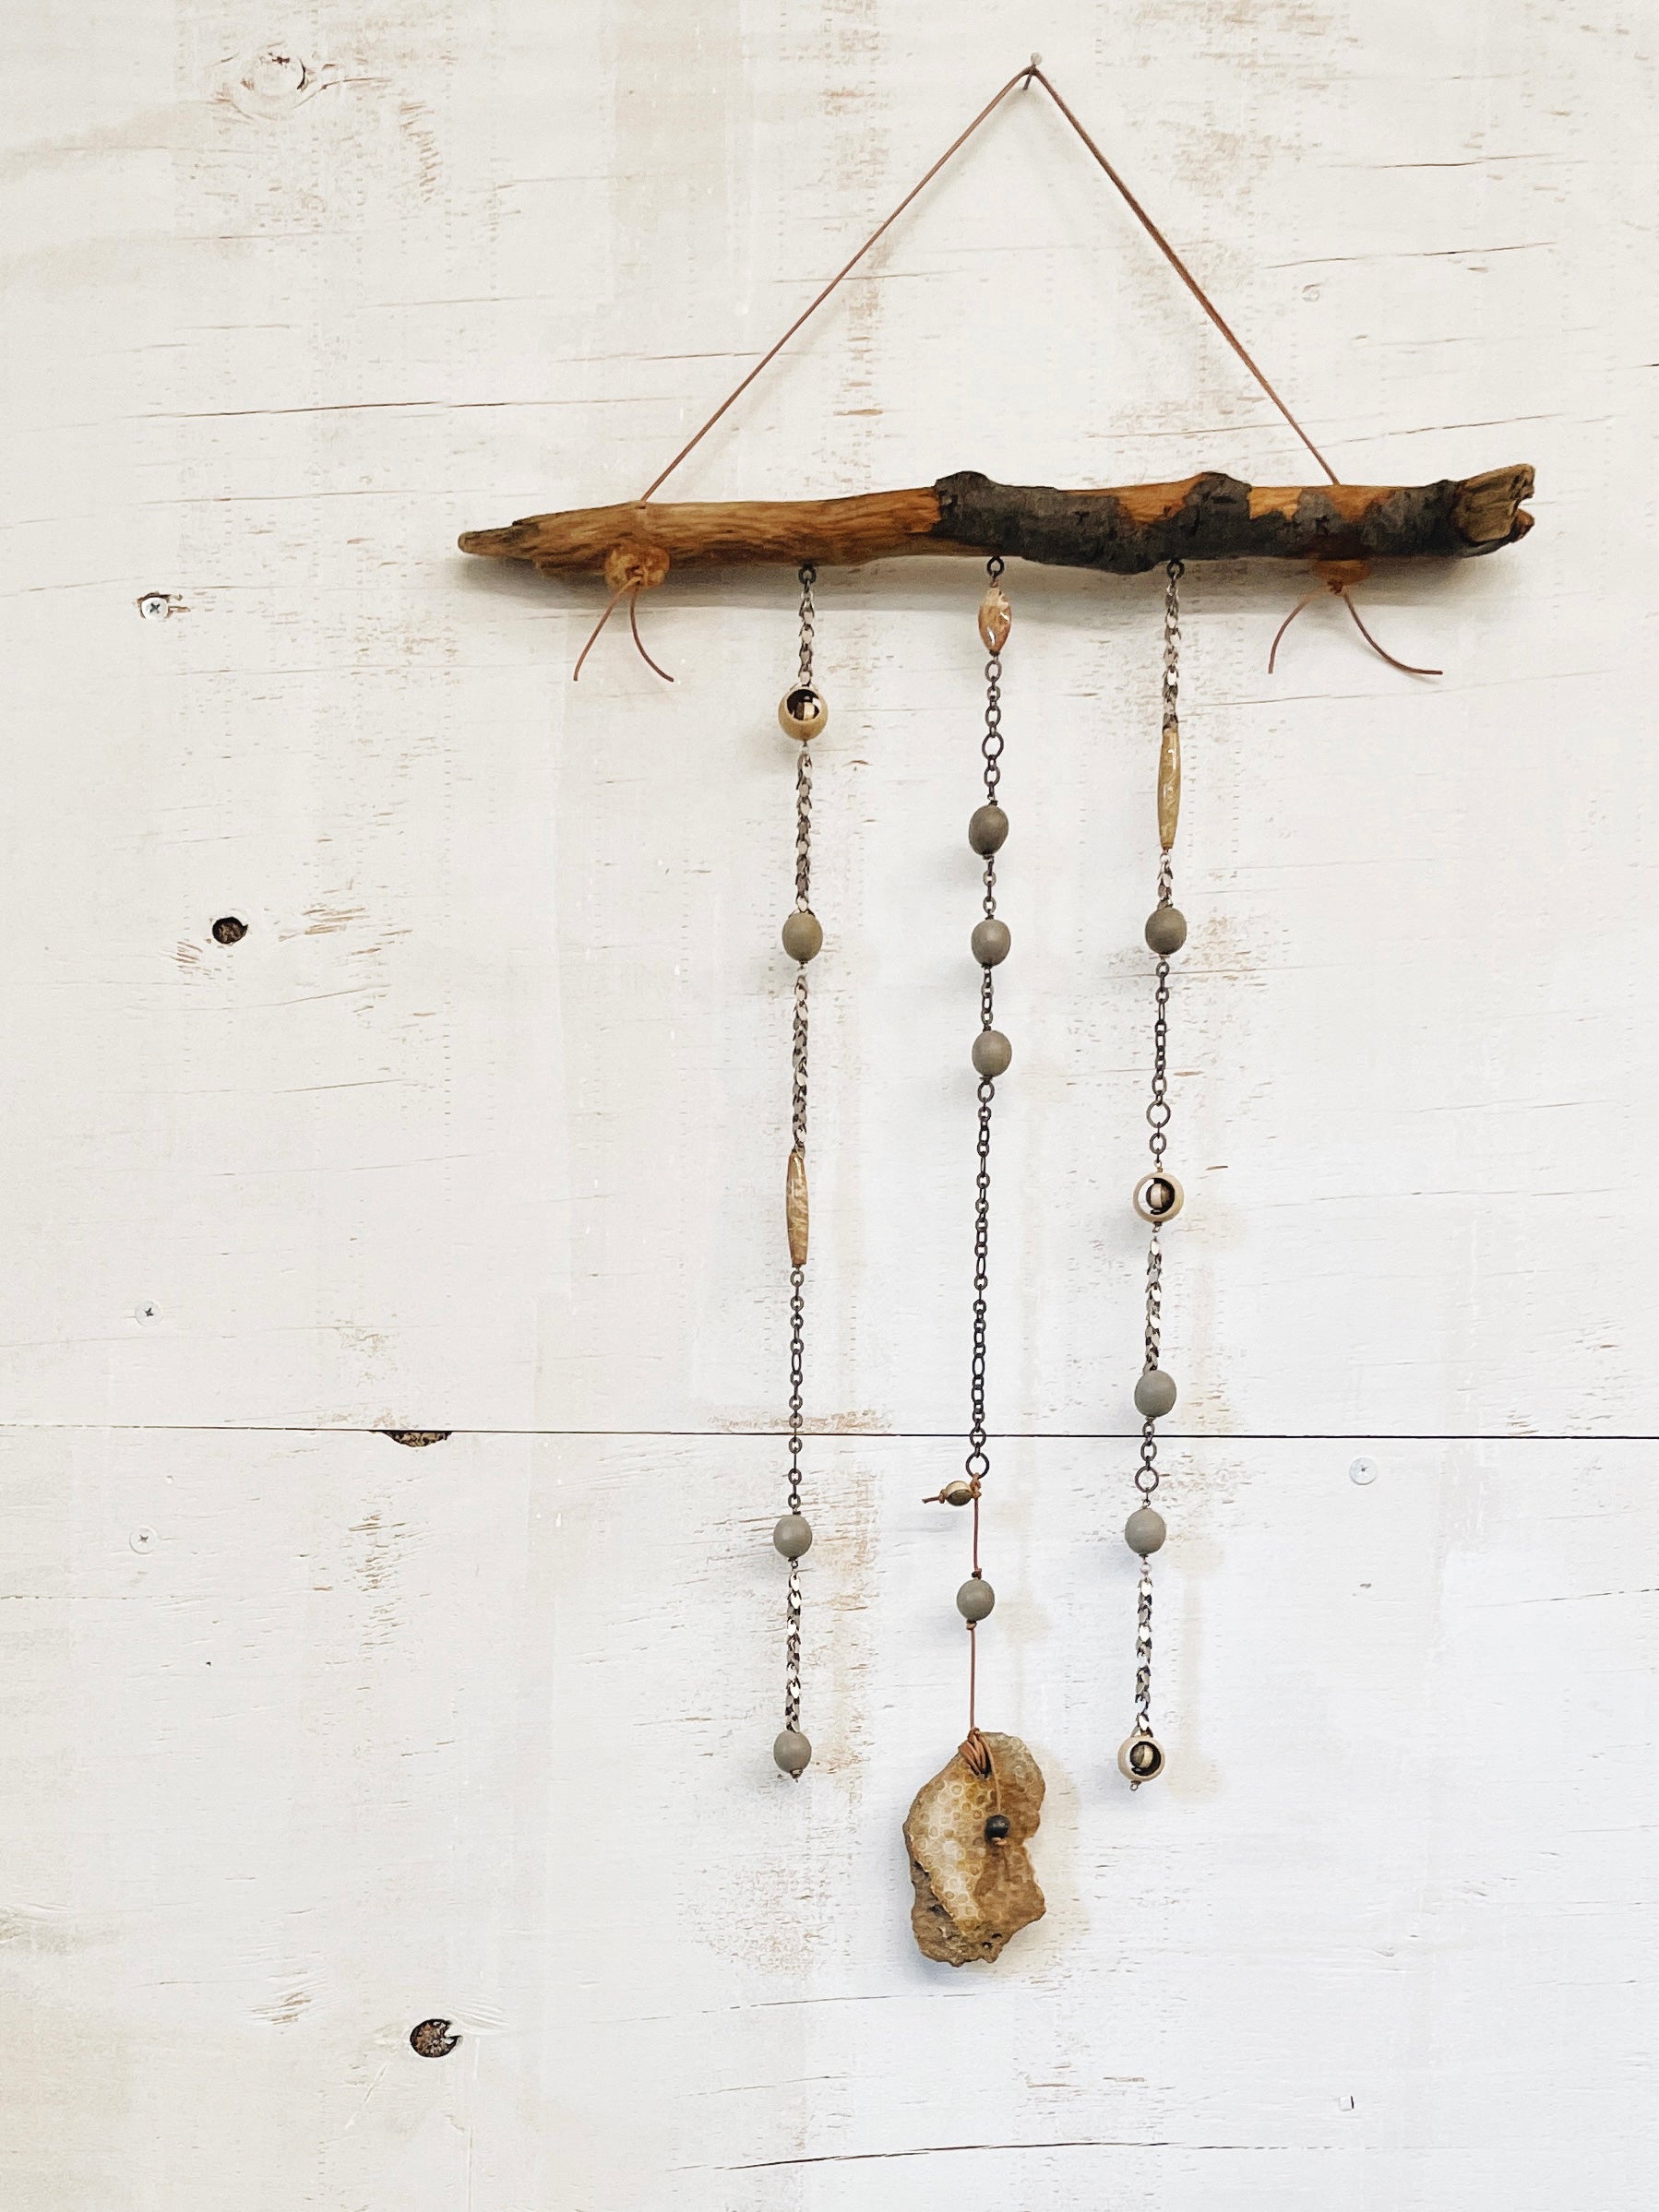 Nature-Inspired Driftwood Lunar Galaxy Wall Hanging with Fauna Seeds, Leather, and Fossilized Coral - Neutral Boho Home Decor